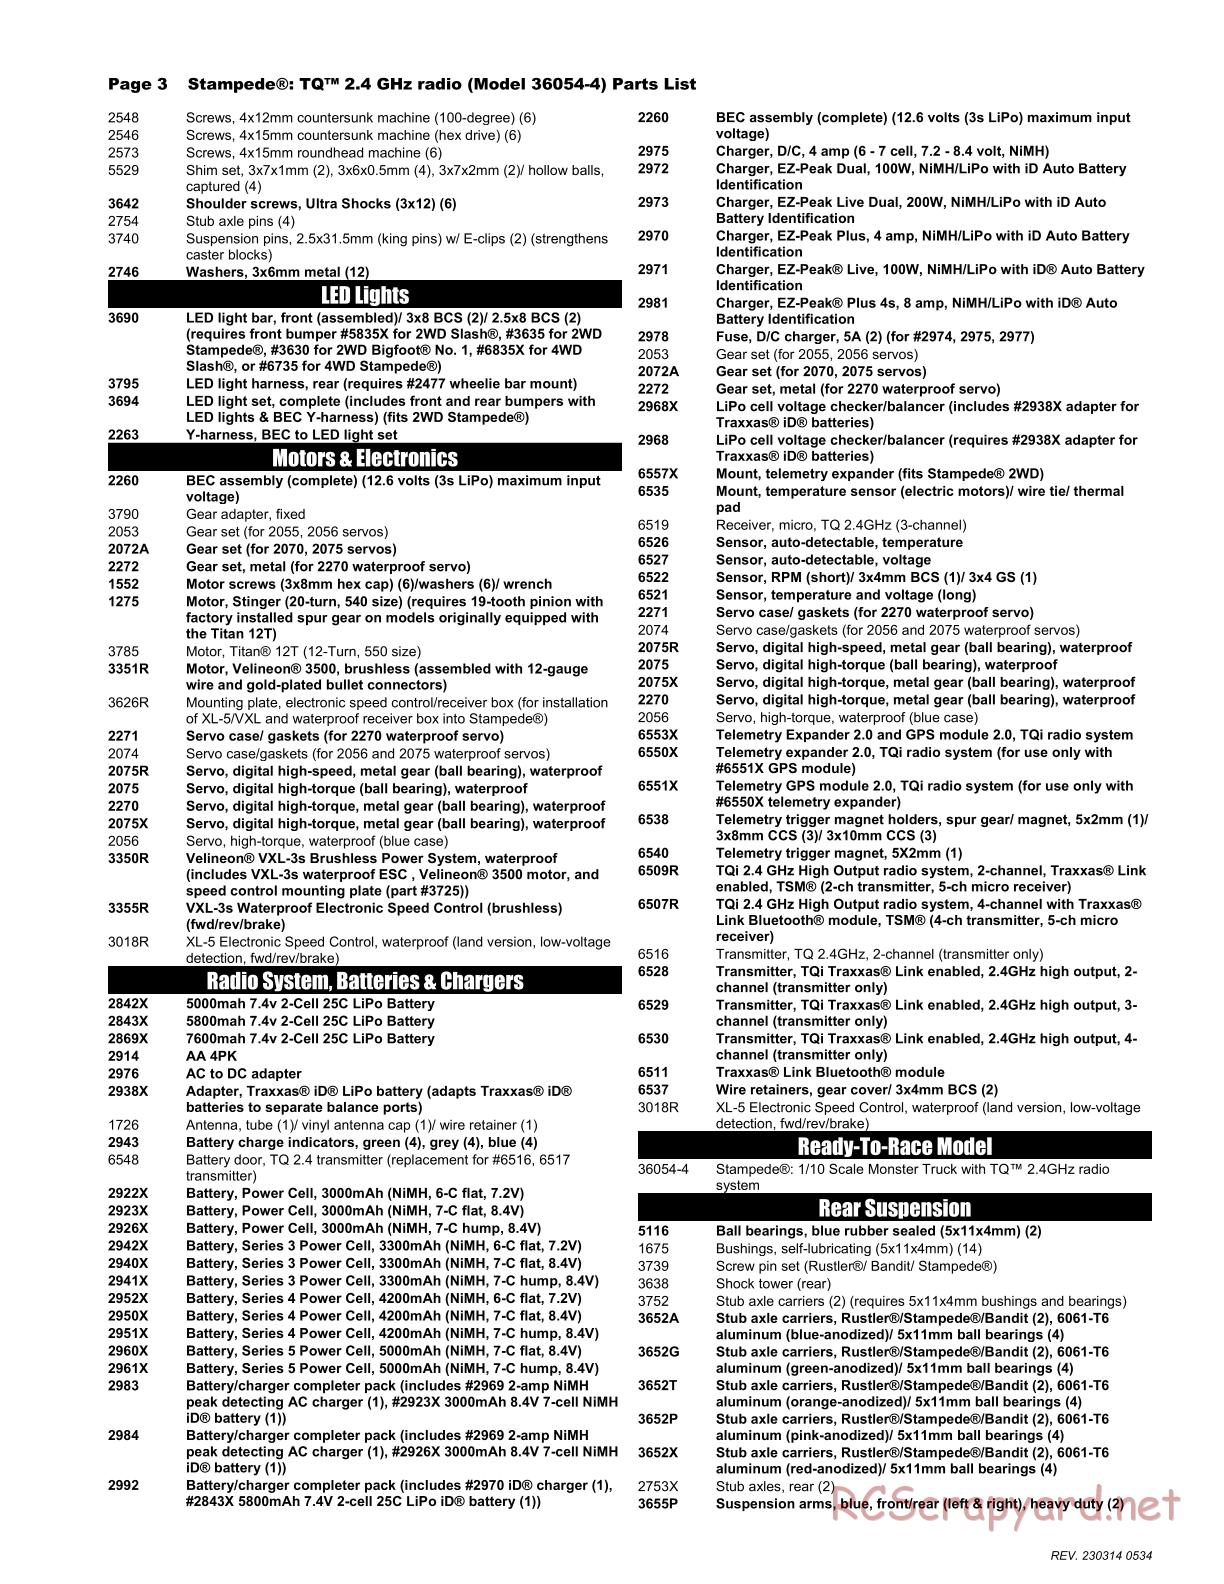 Traxxas - Stampede XL-5 (2018) - Parts List - Page 3